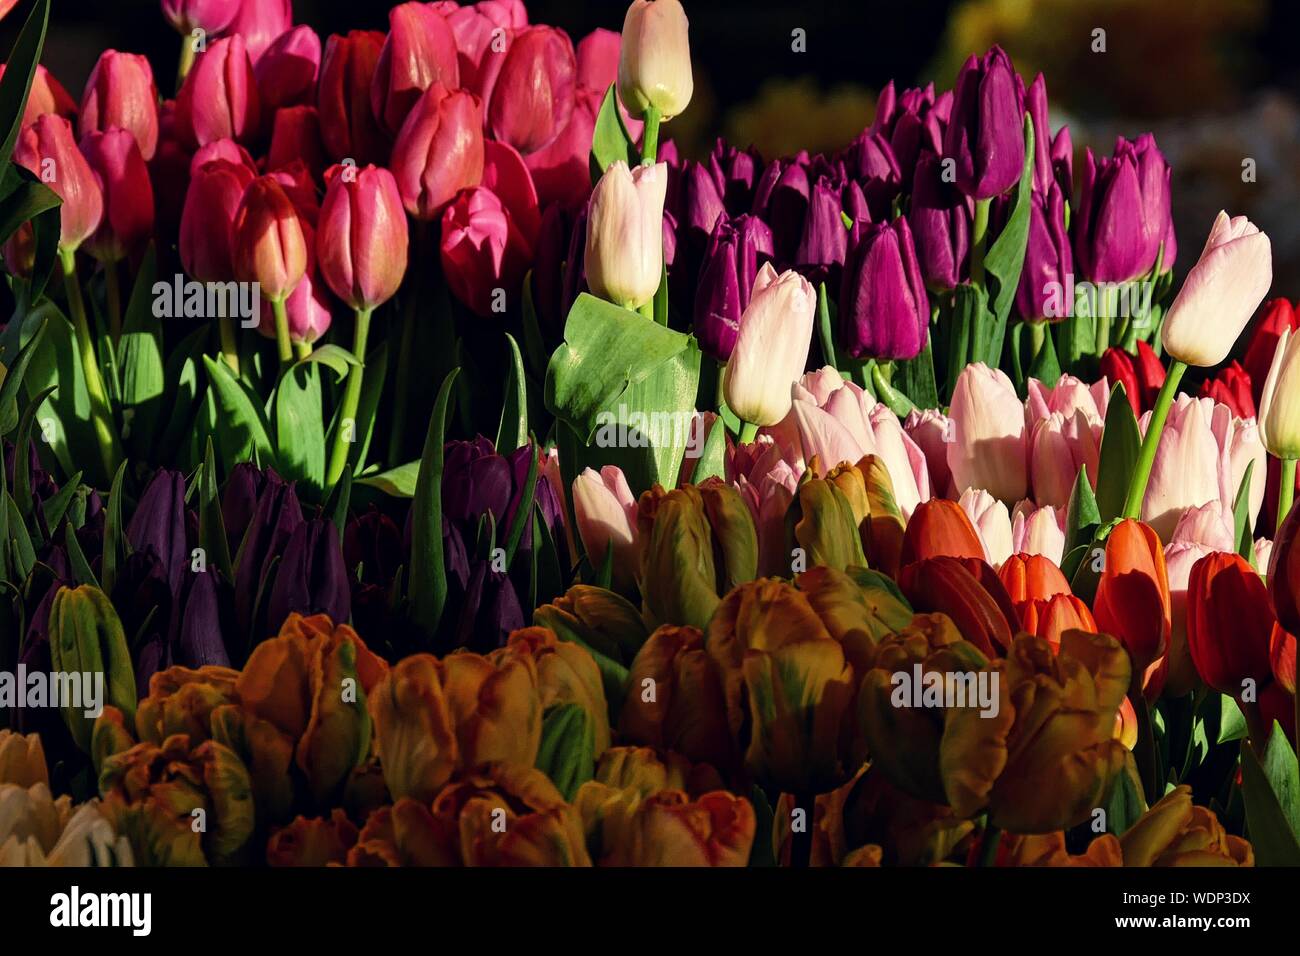 Multi Colored Tulips Blooming On Sunny Day Stock Photo